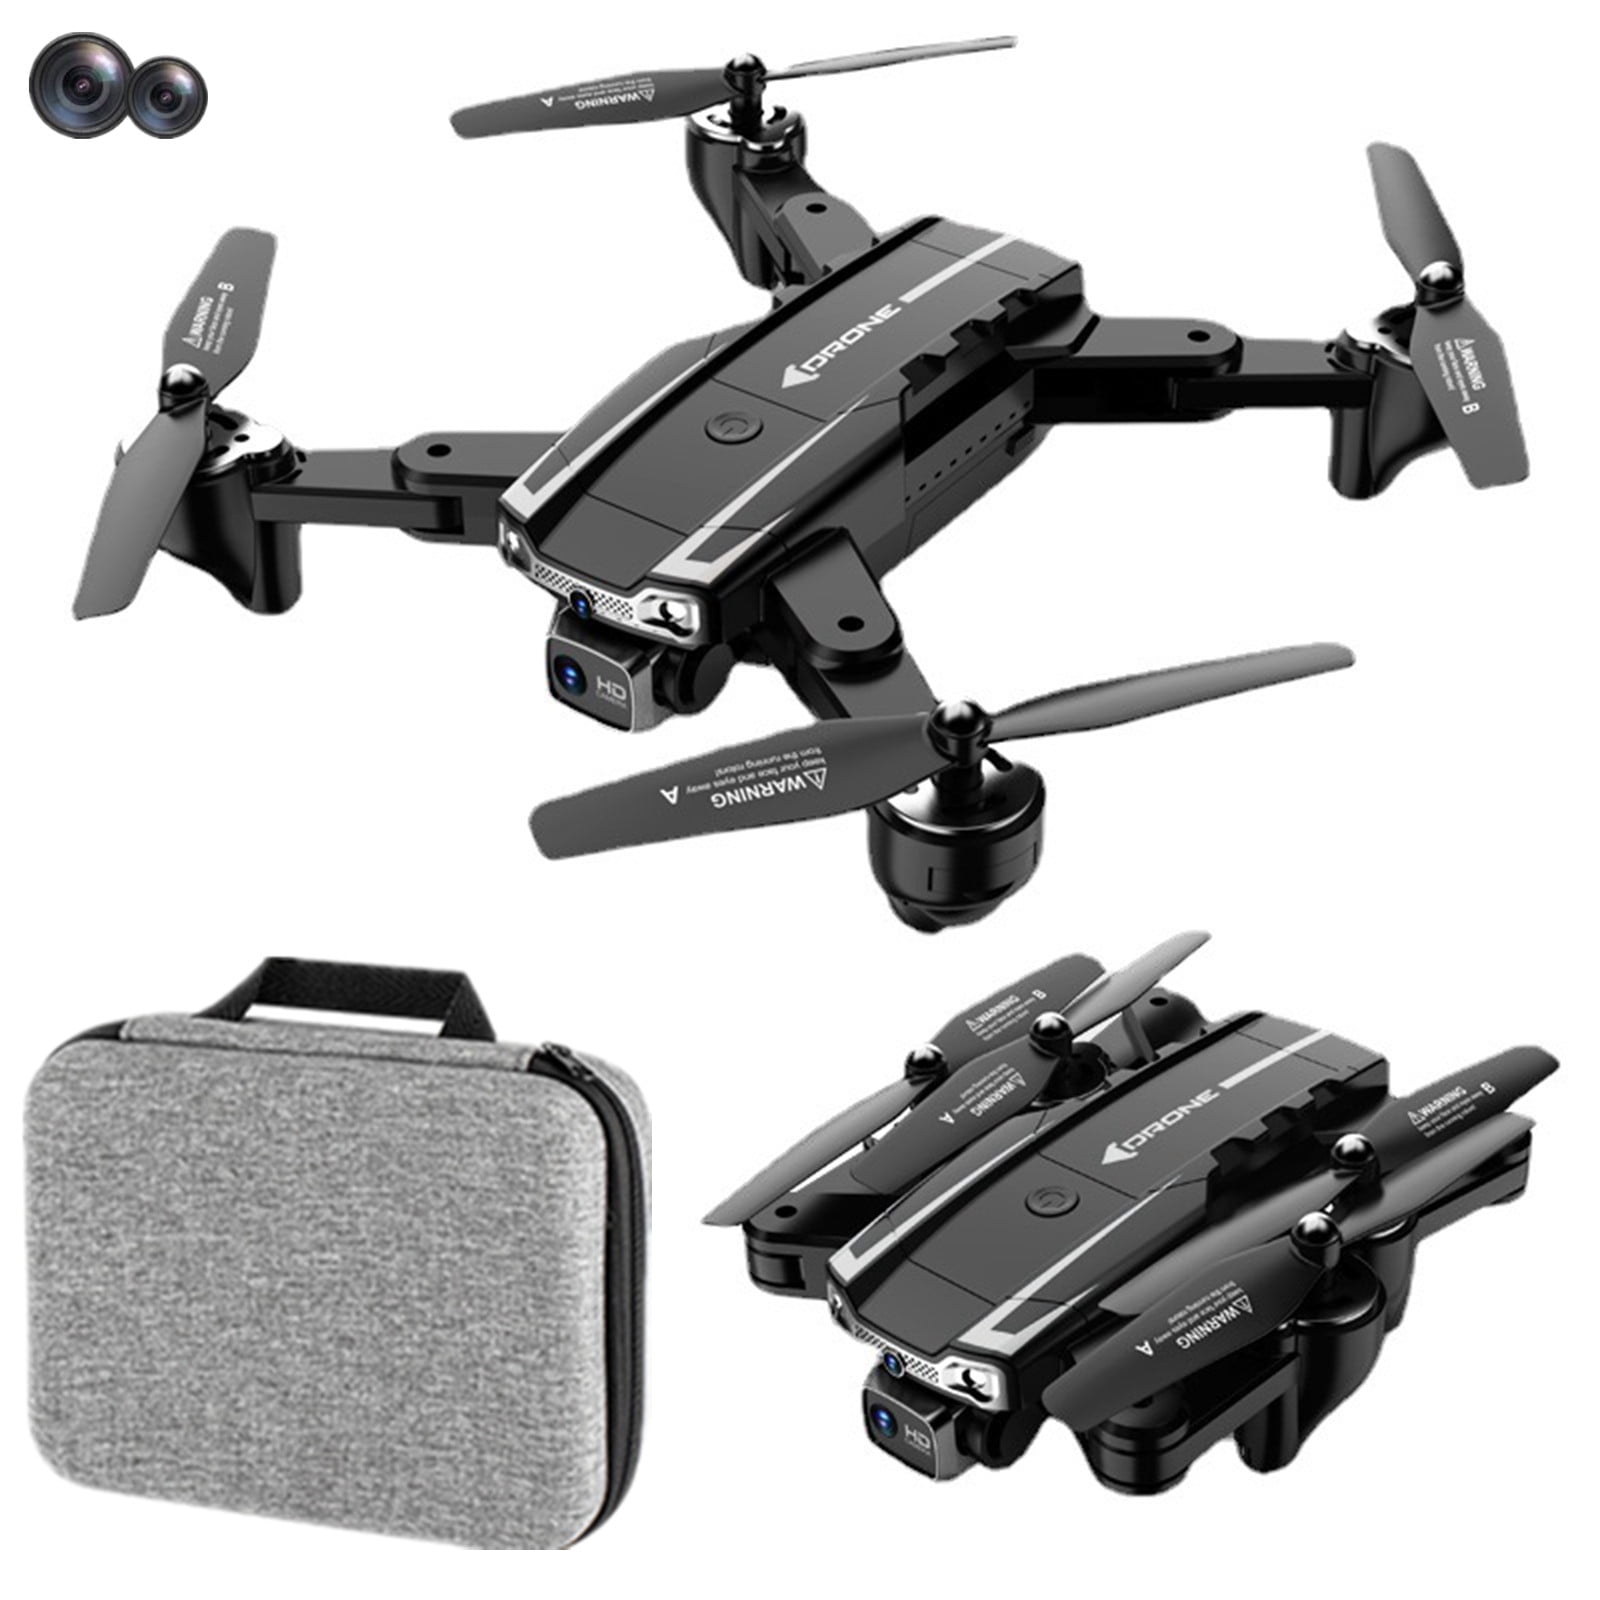 fyp #deerc #drone #gift #chirstmasgift DEERC D10,buy it to suprise